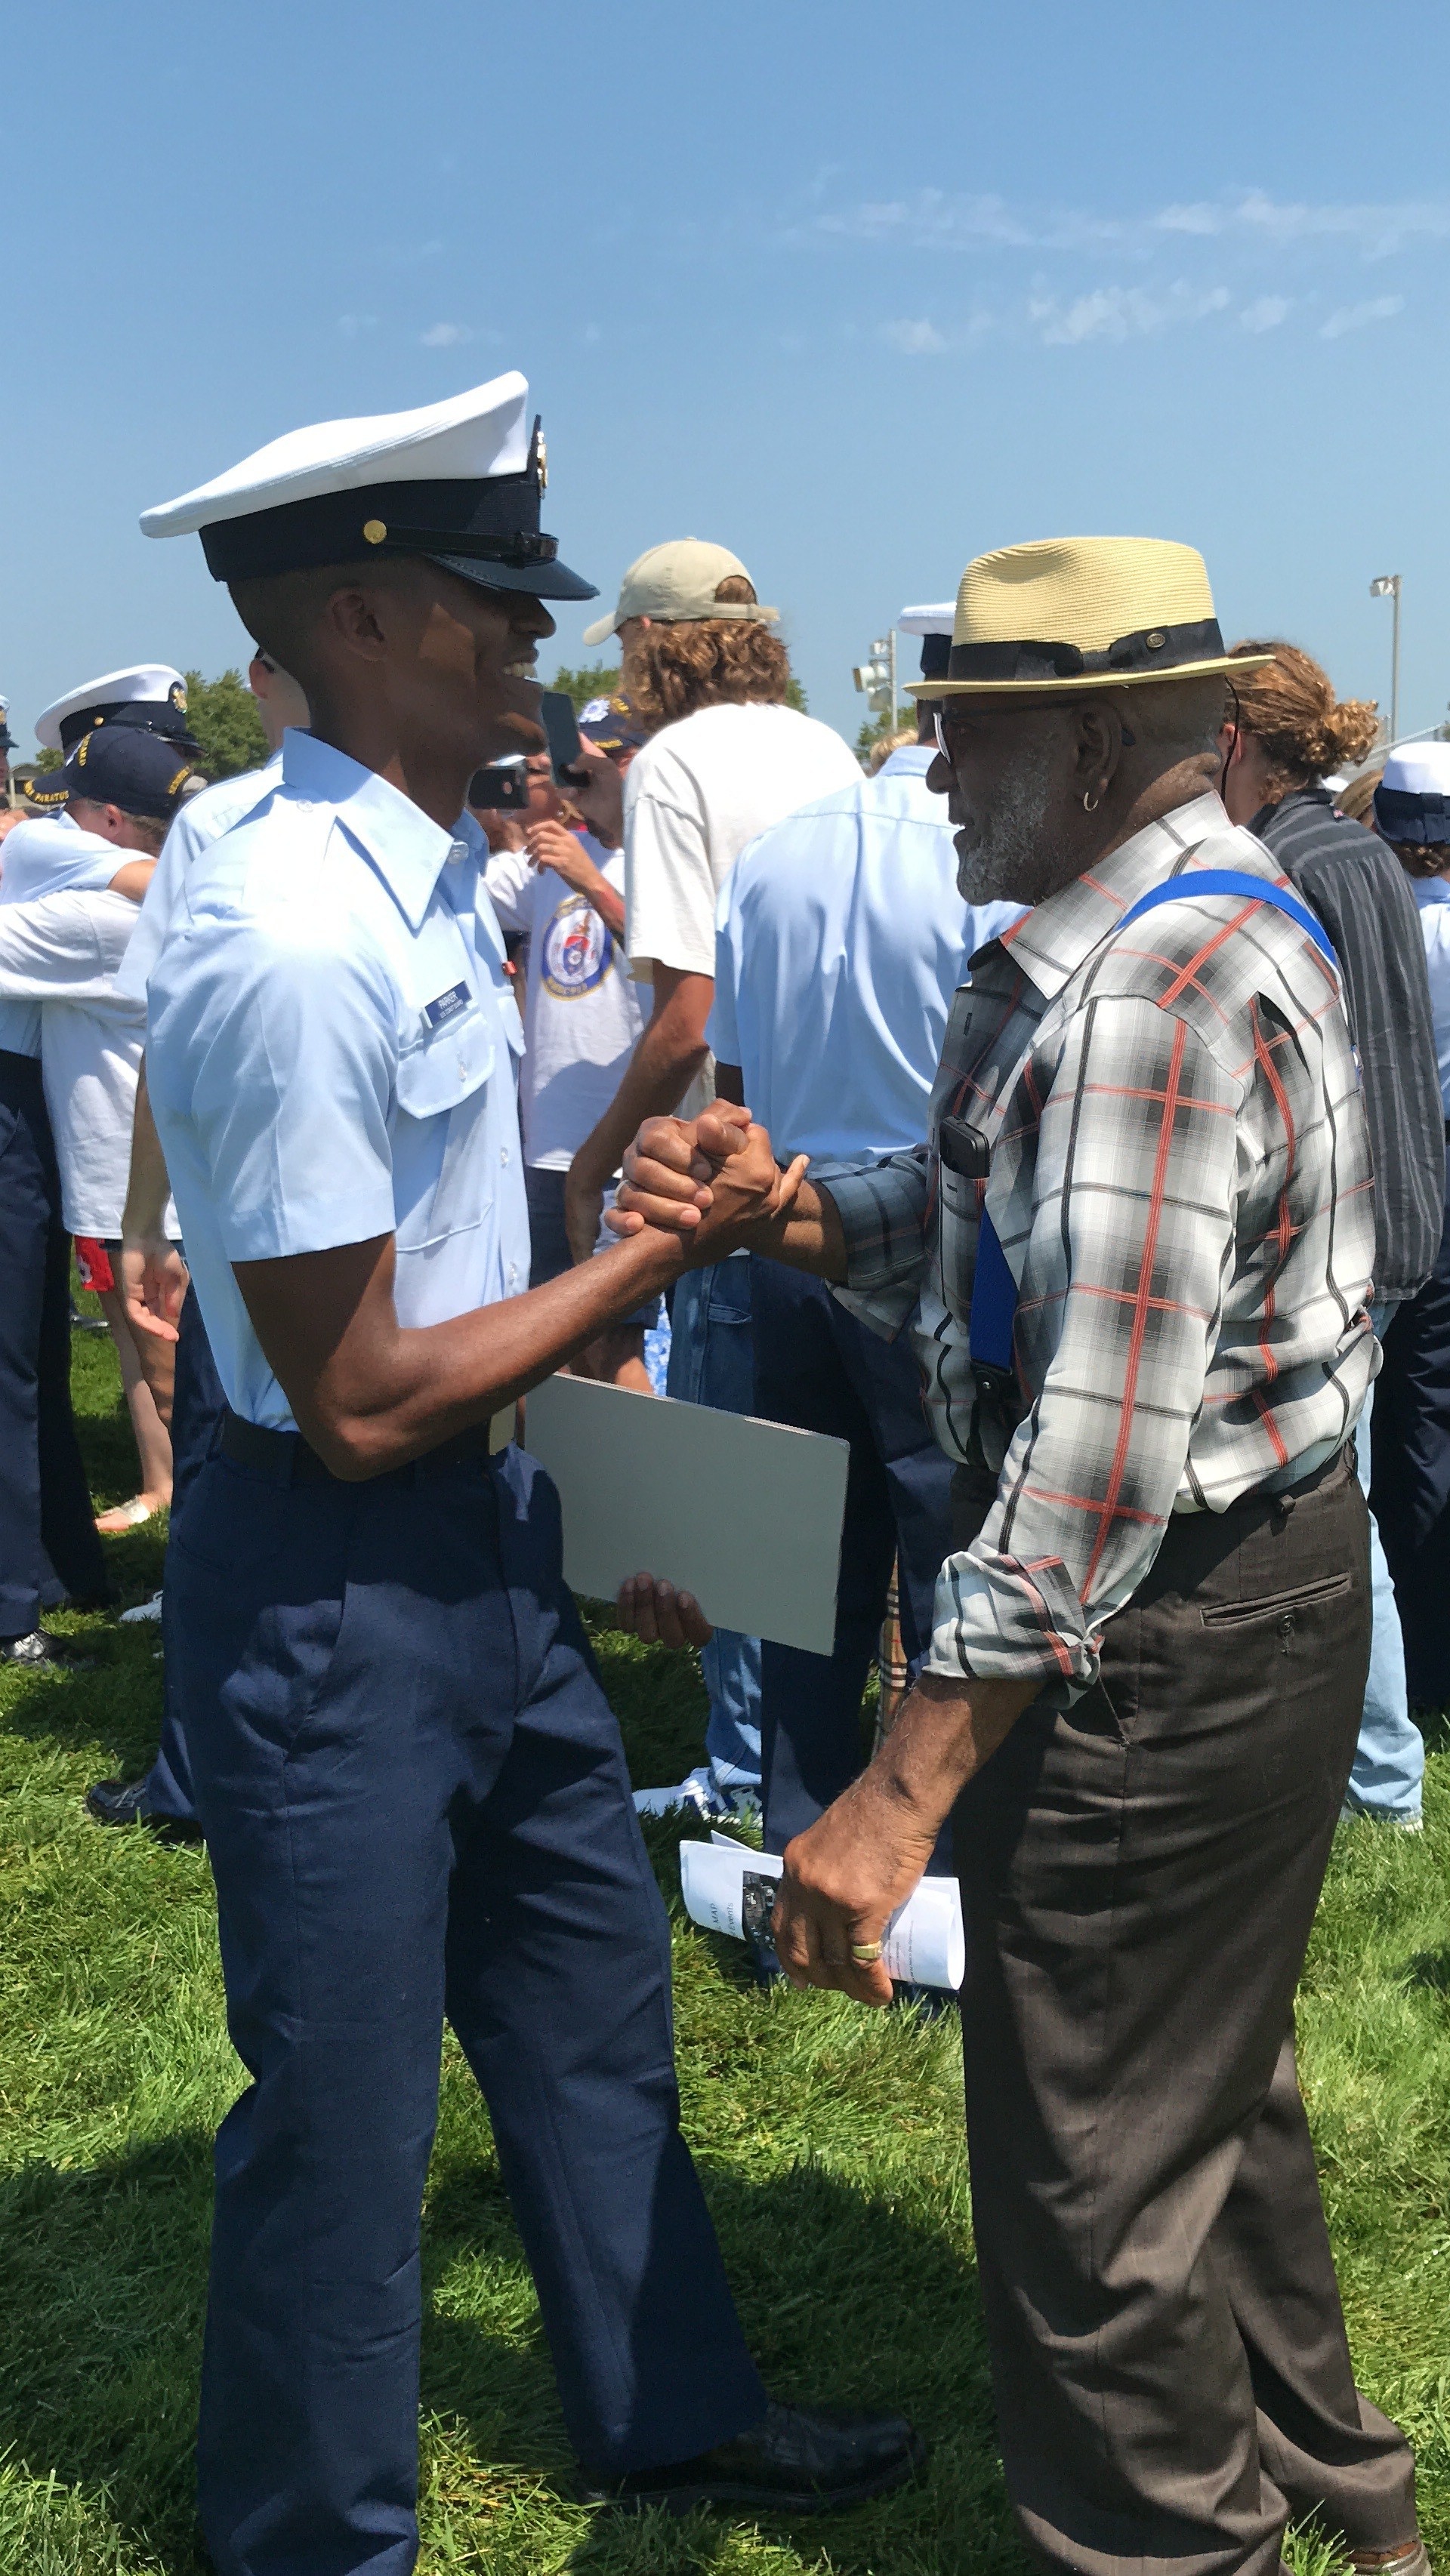 FA Tyrique Parker, dressed in formal military clothes, shakes hands with an older relative